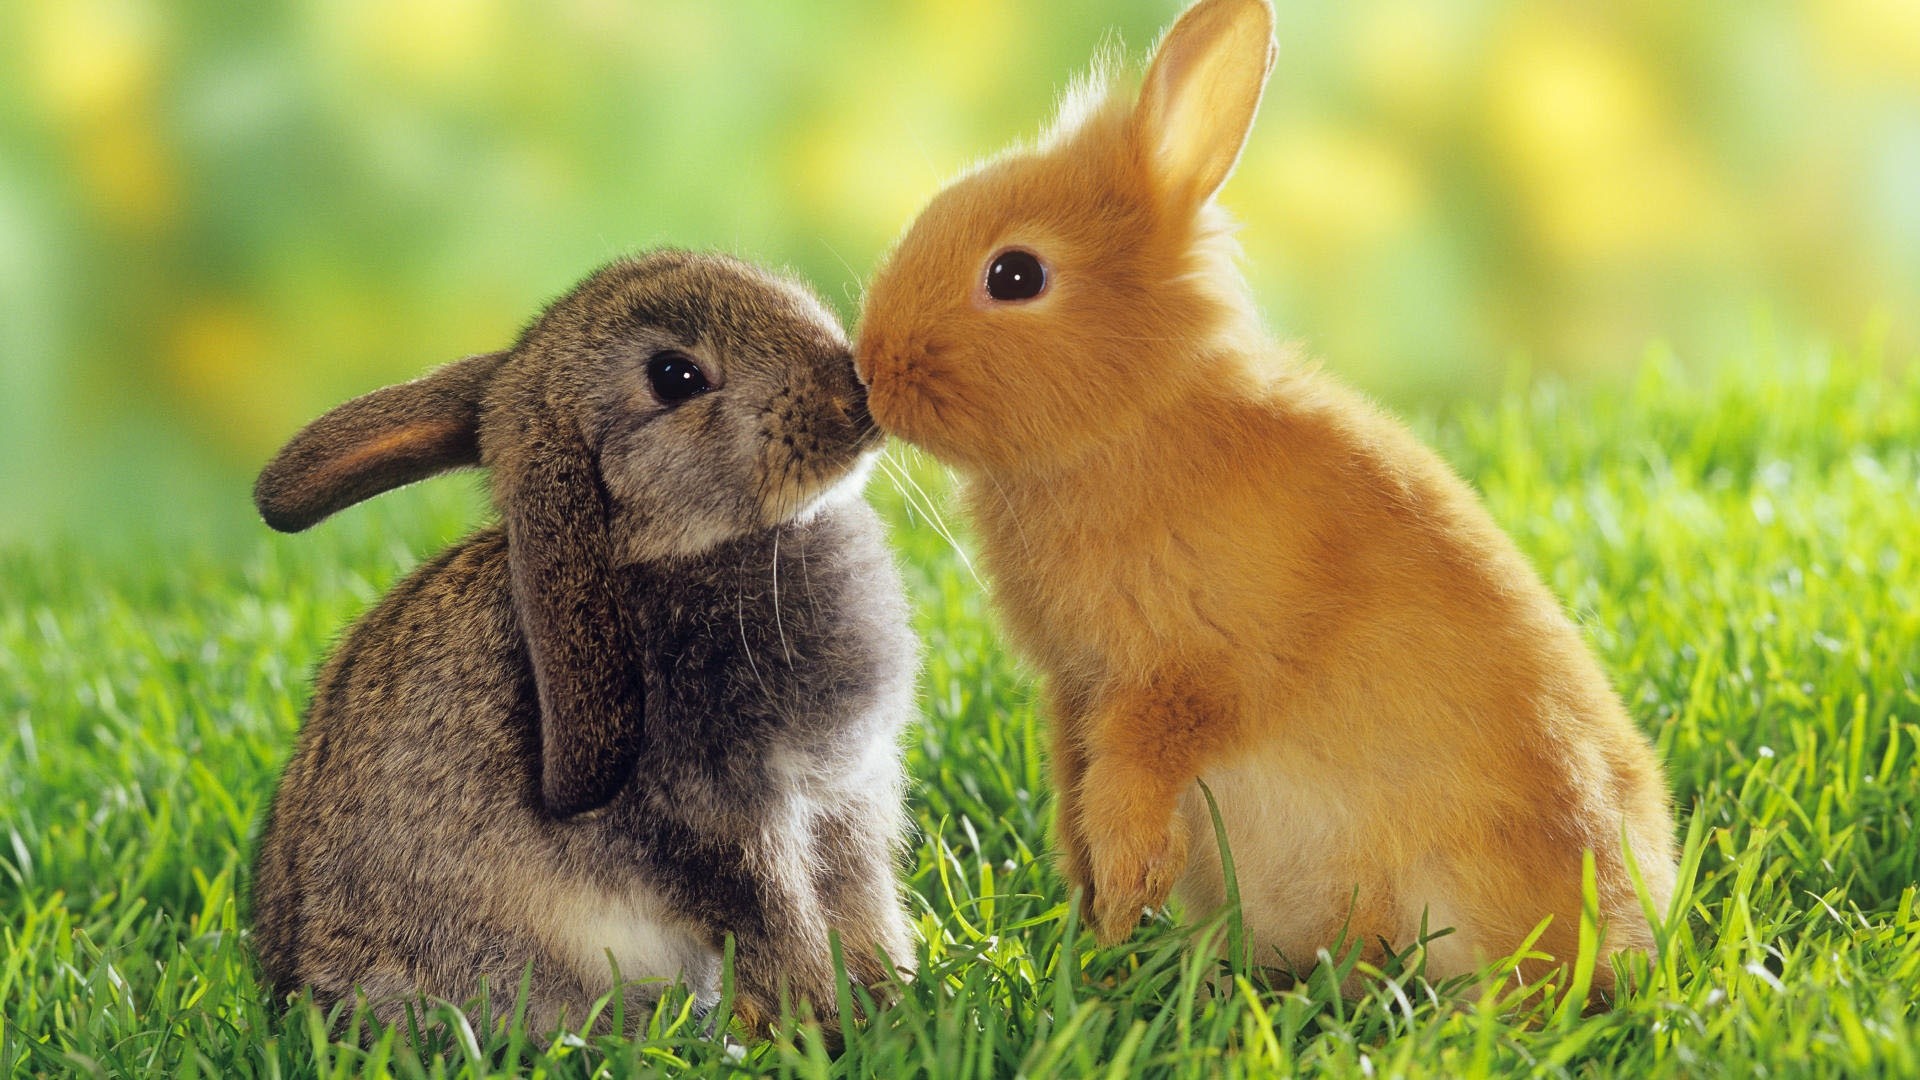 Cute Easter Bunny Wallpaper (58+ images)